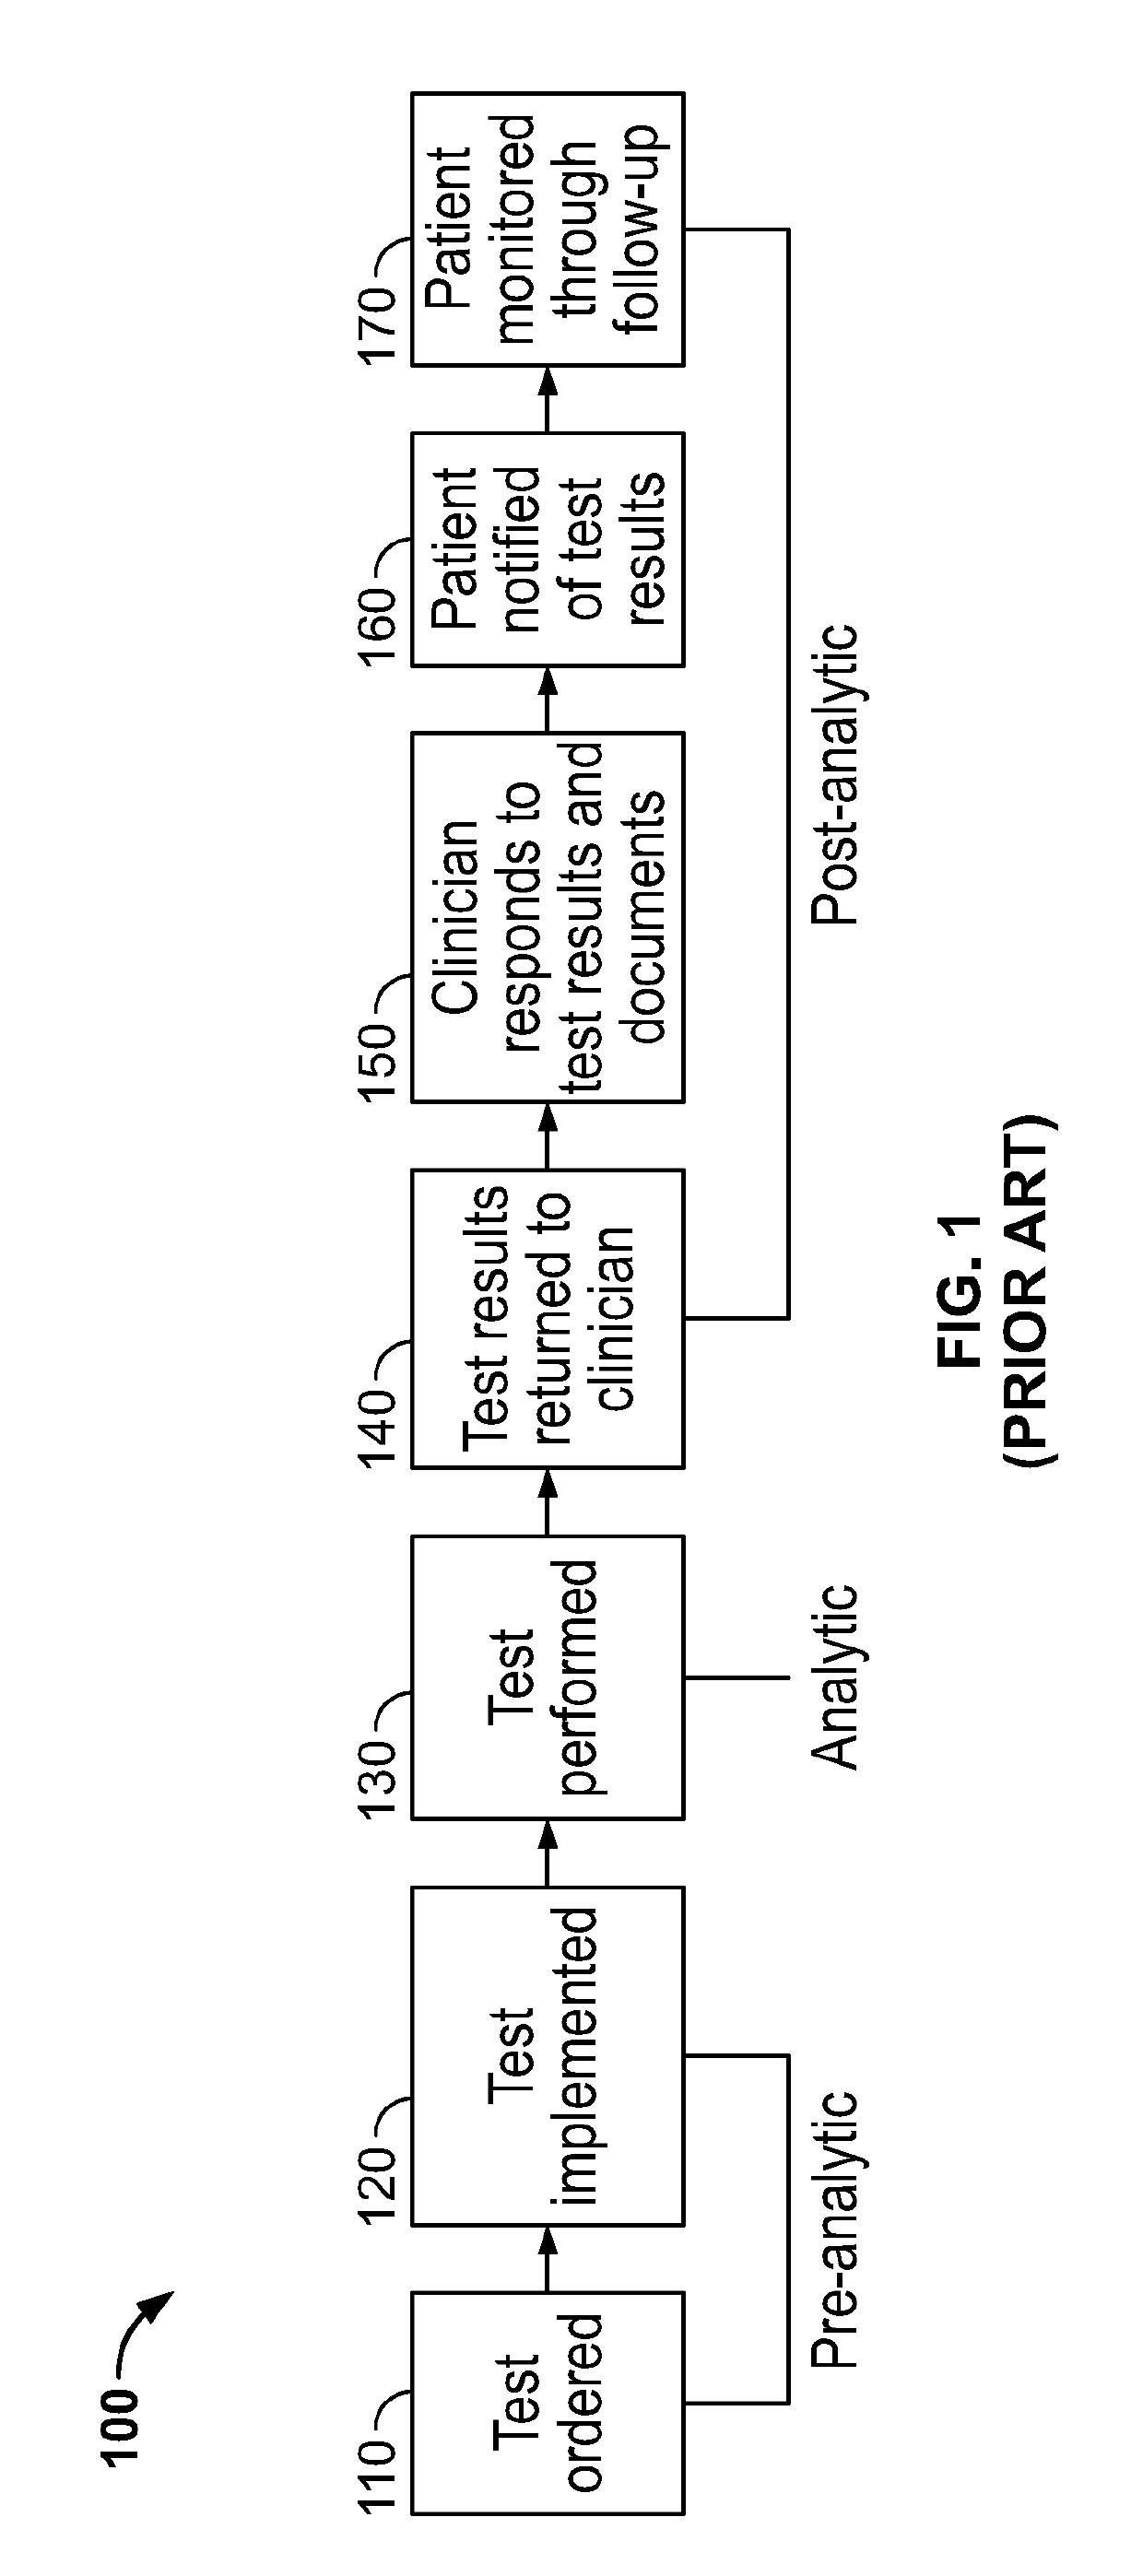 System and method for increasing efficiency of medical laboratory data interpretation, real time clinical decision support, and patient communications